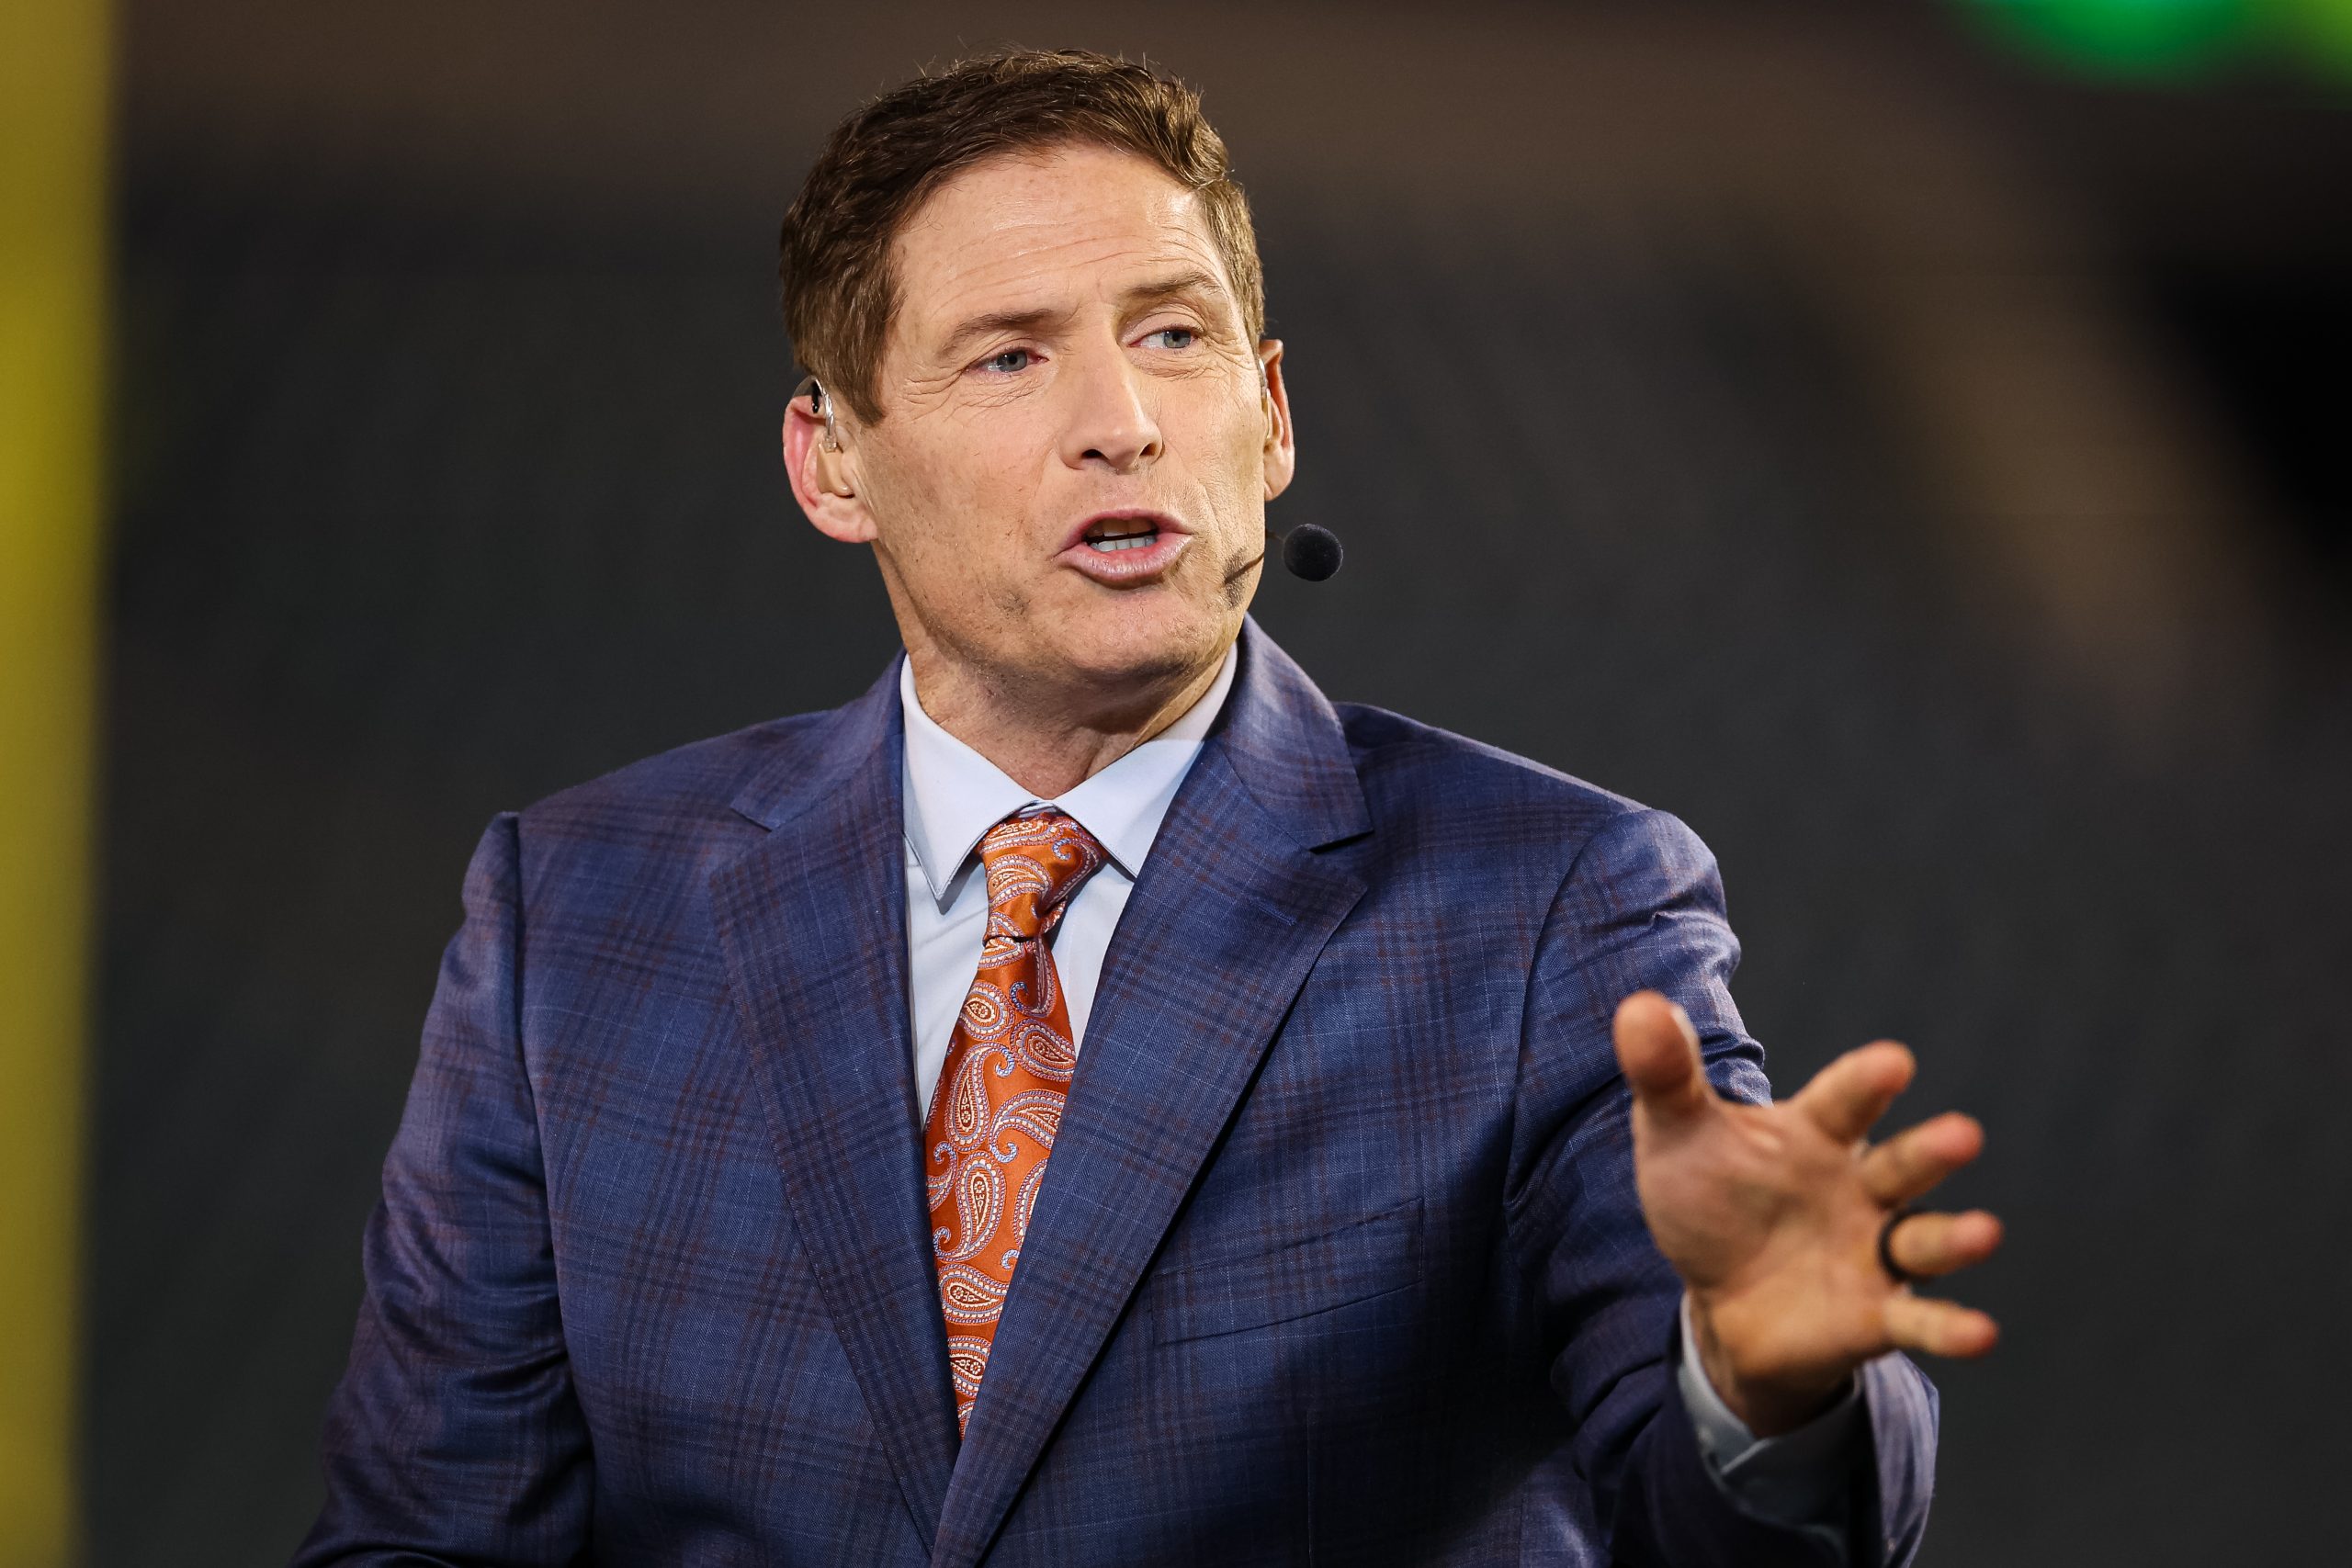 Former NFL player and current NFL analyst Steve Young interacts before the game between the Philade...